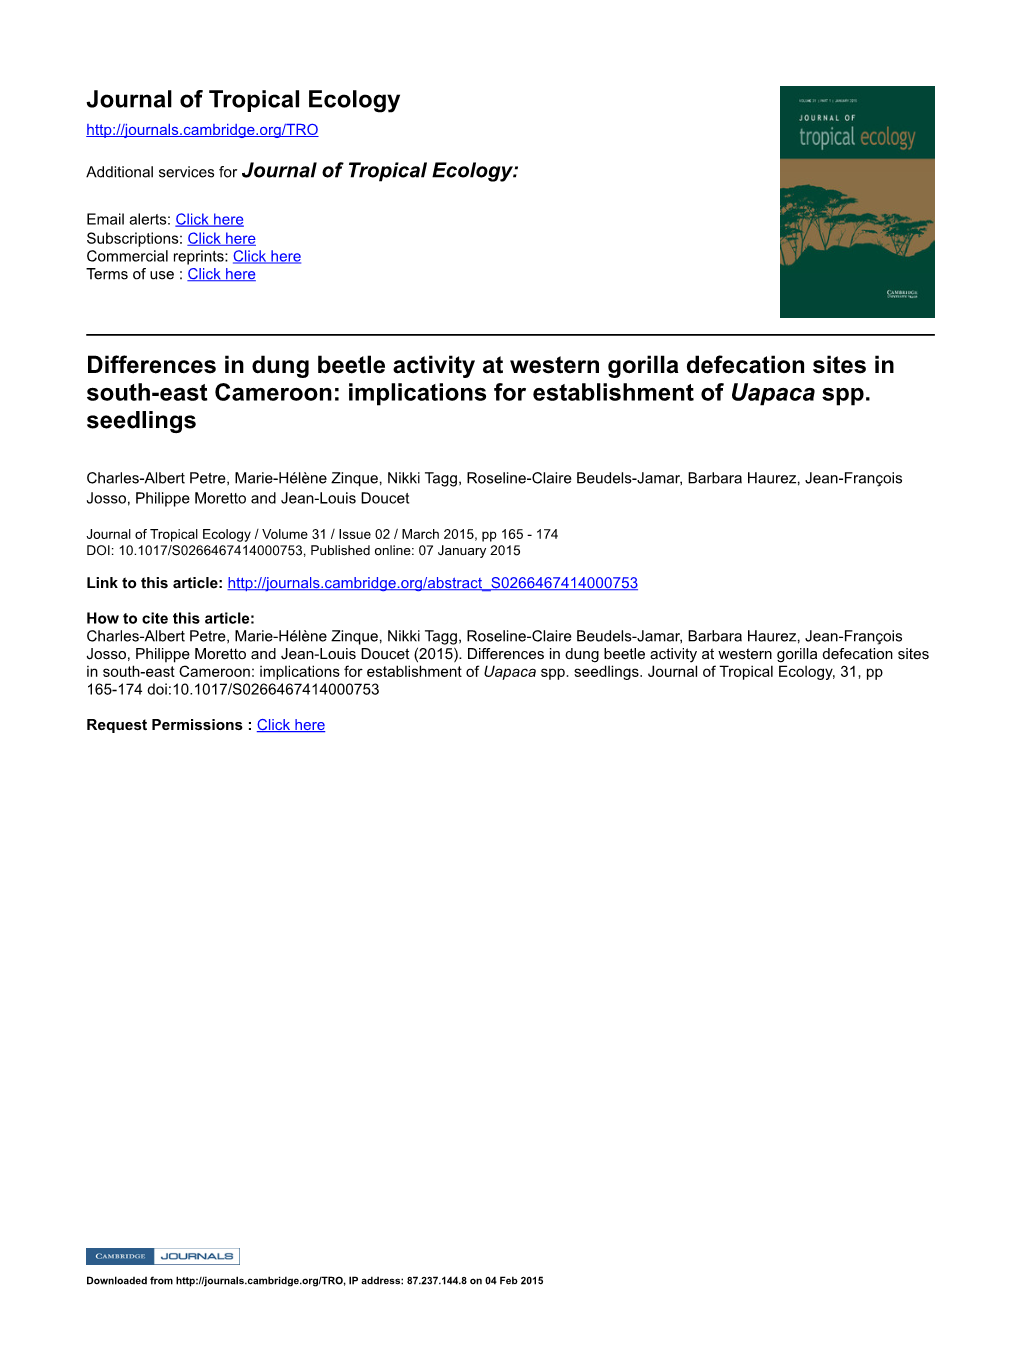 Journal of Tropical Ecology Differences in Dung Beetle Activity